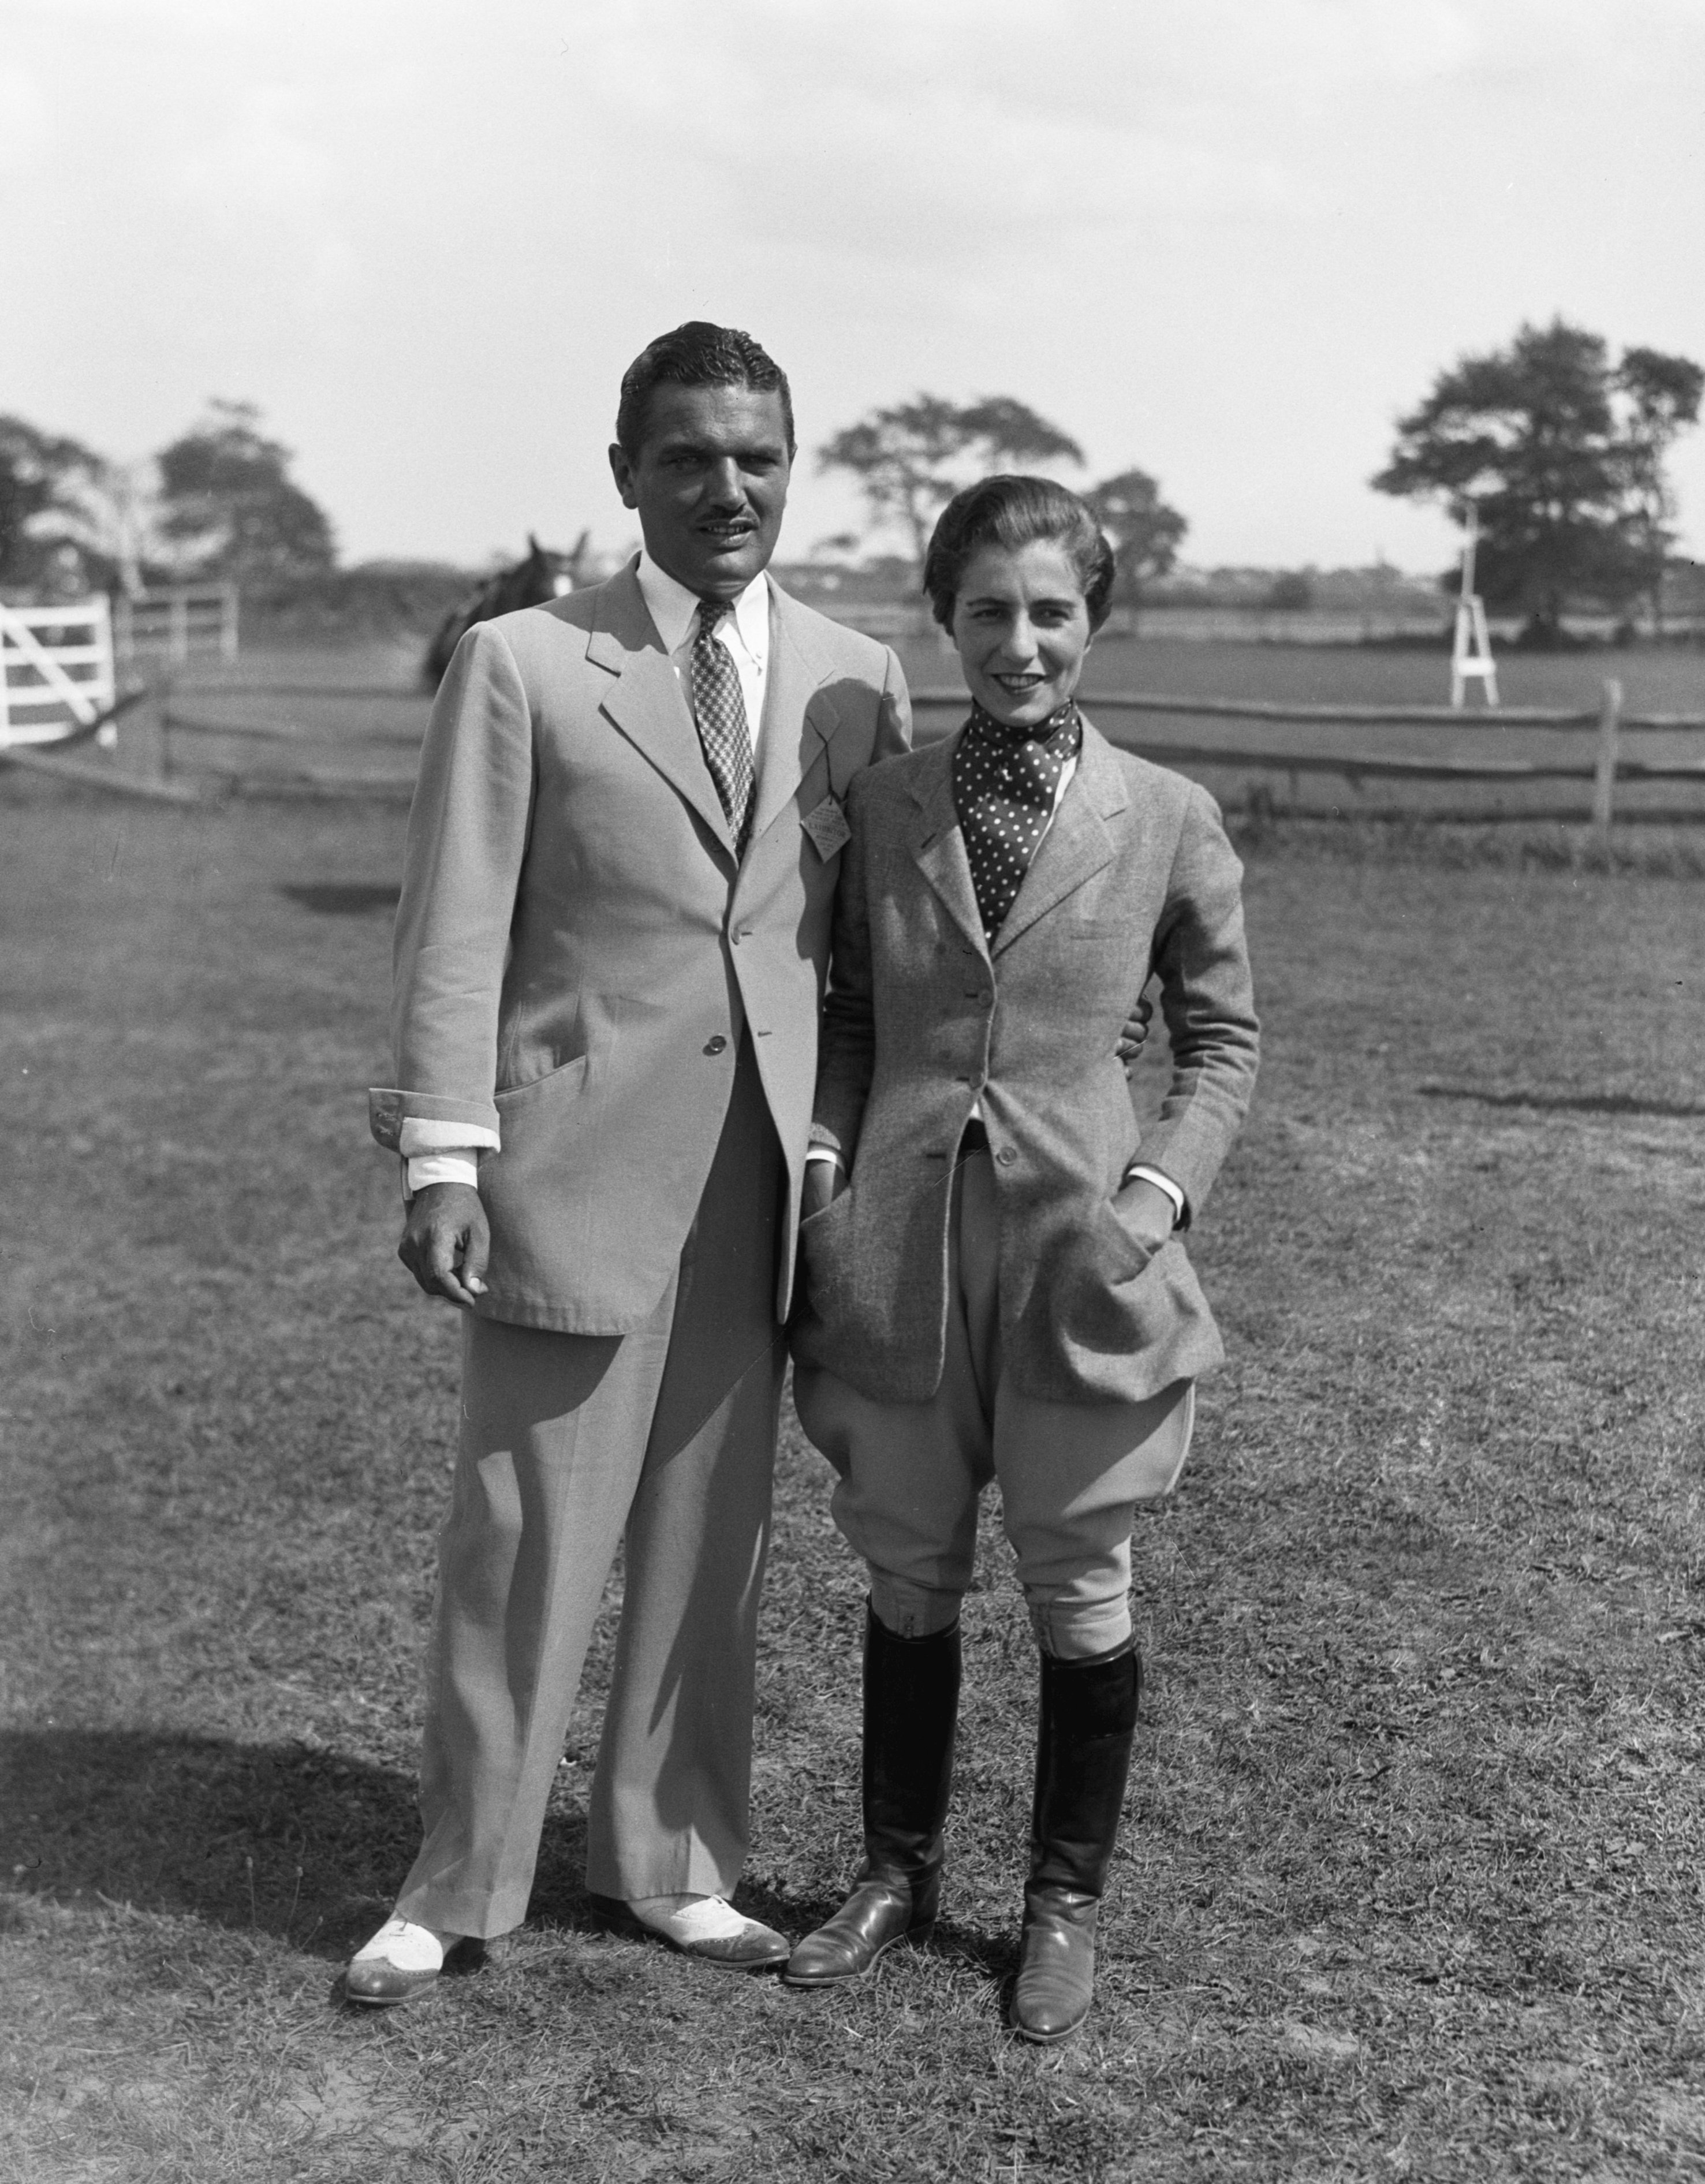 John and Janet Lee Bouvier at Horse Show in 1932 in Southampton, Long Island. | Source: Bettmann/Getty Images